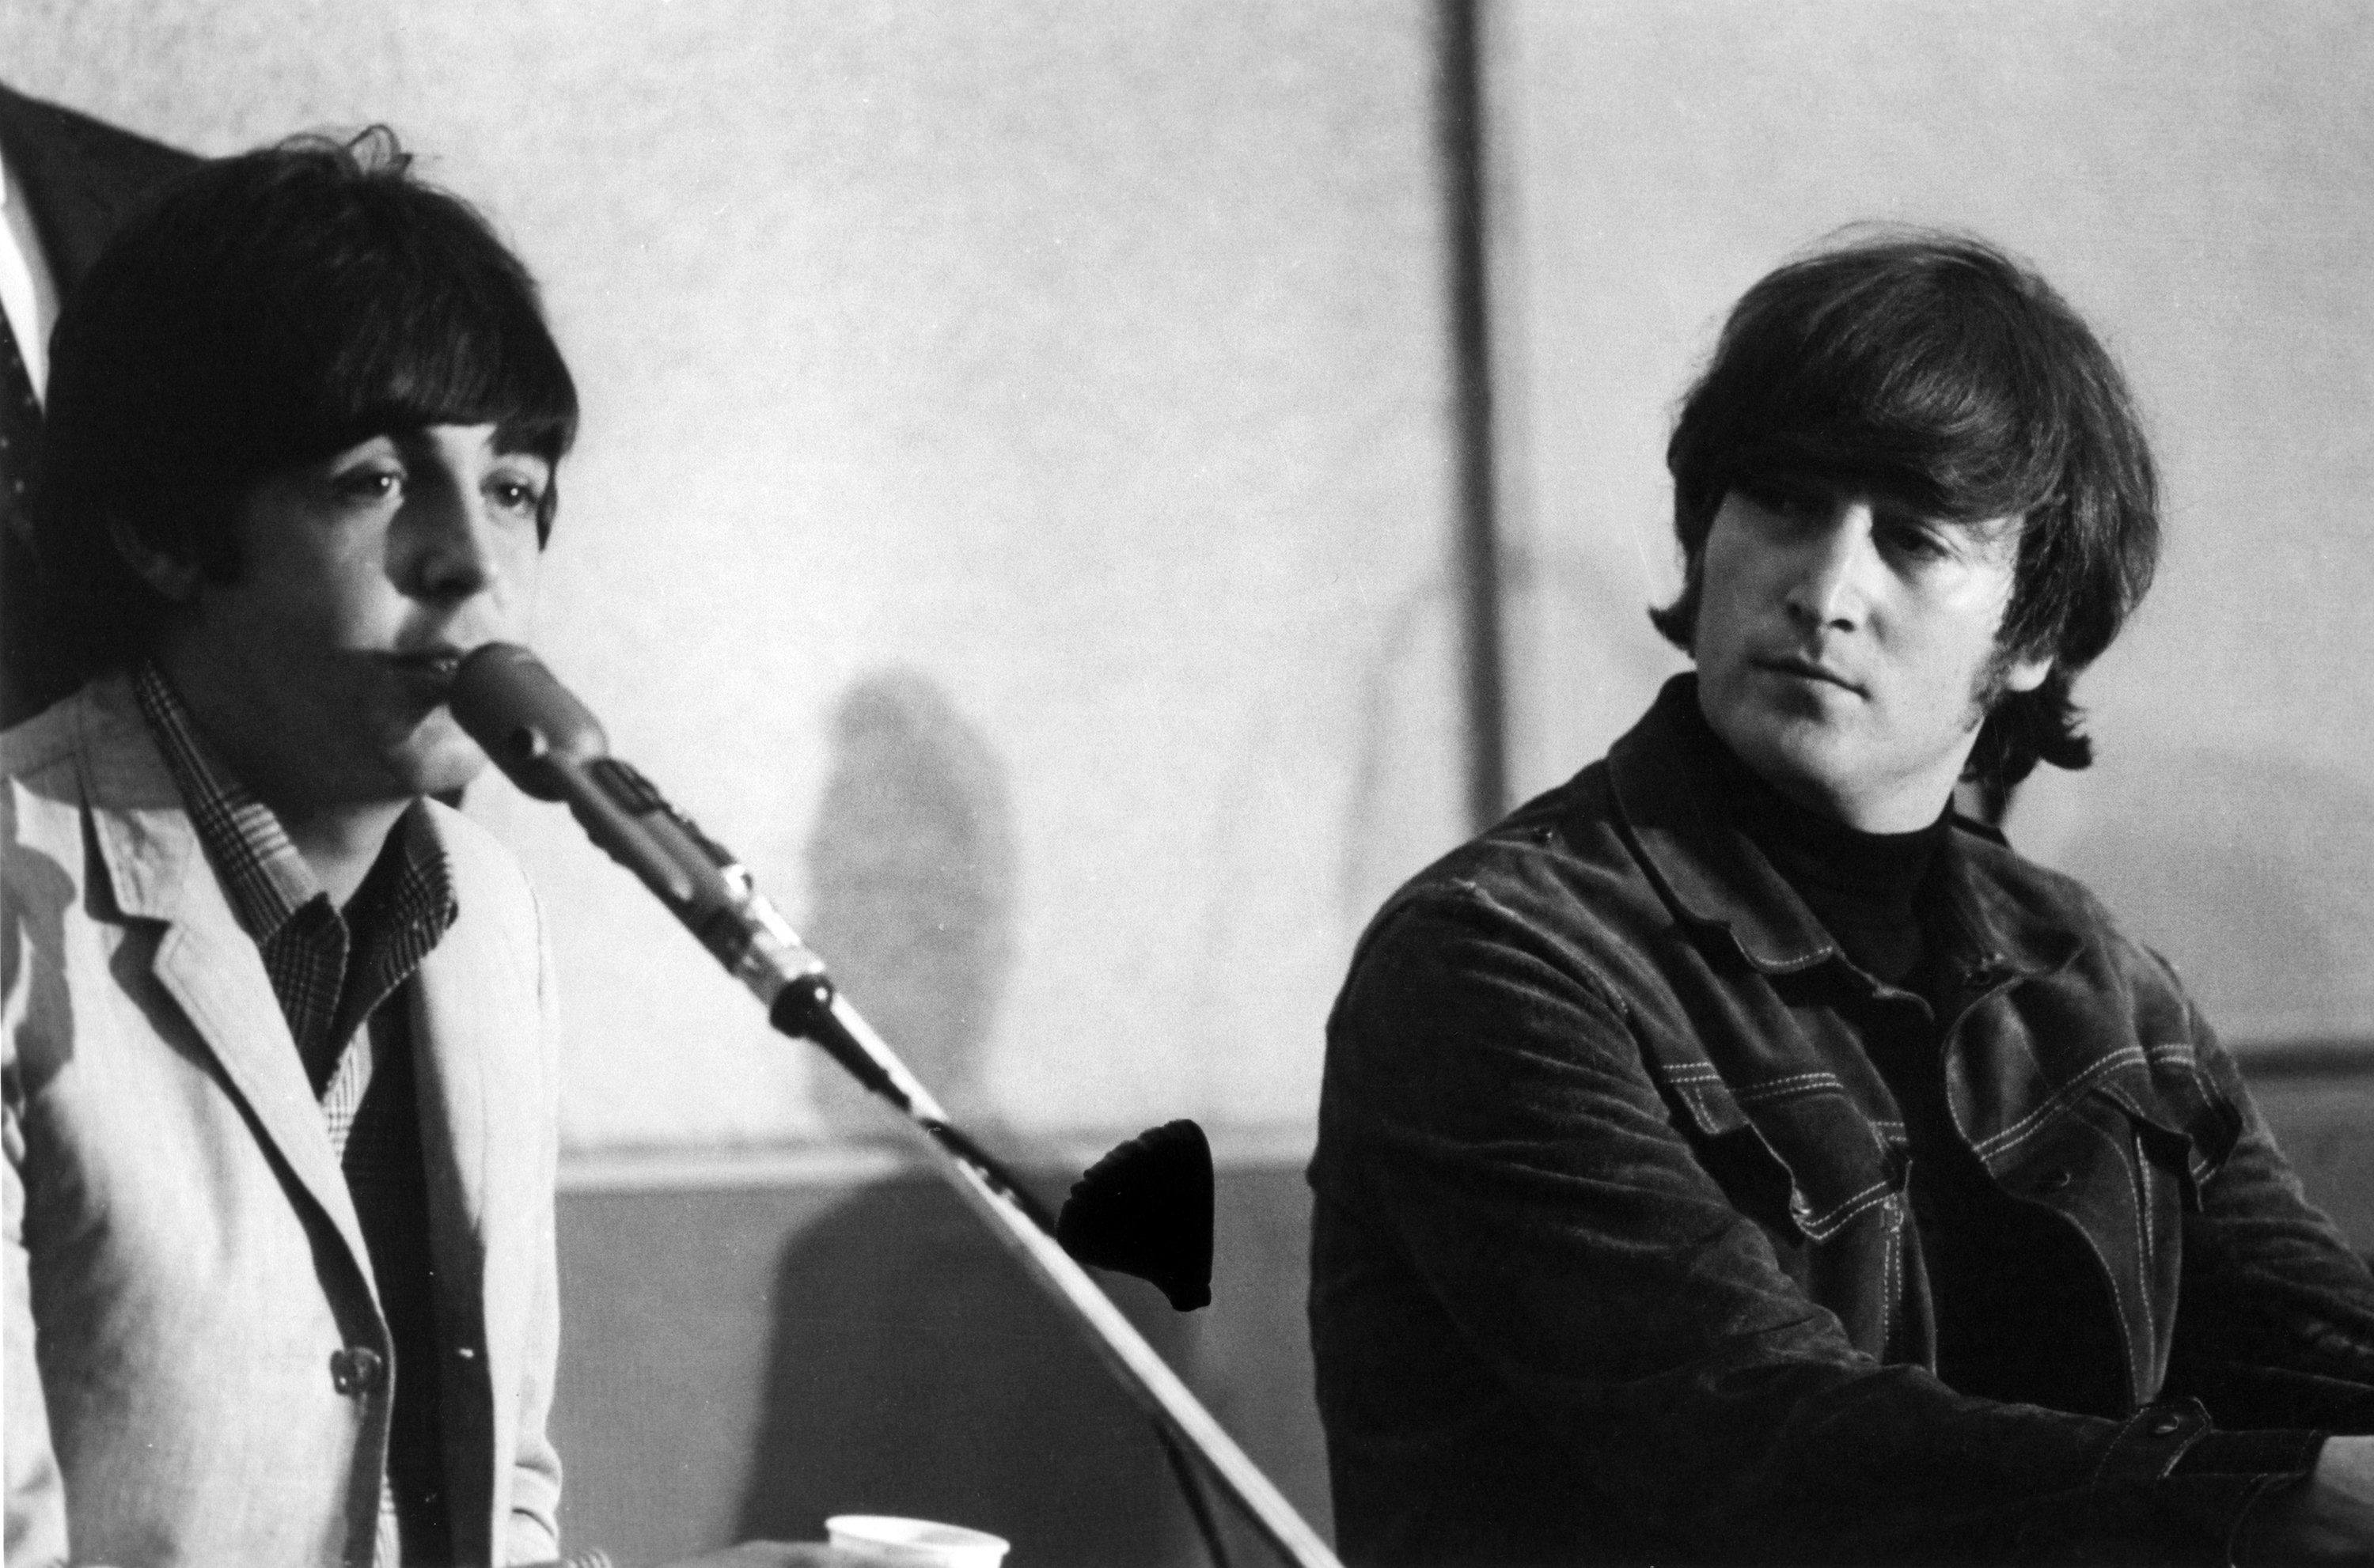 Paul McCartney and John Lennon at a press conference for 'Help!' for The Beatles